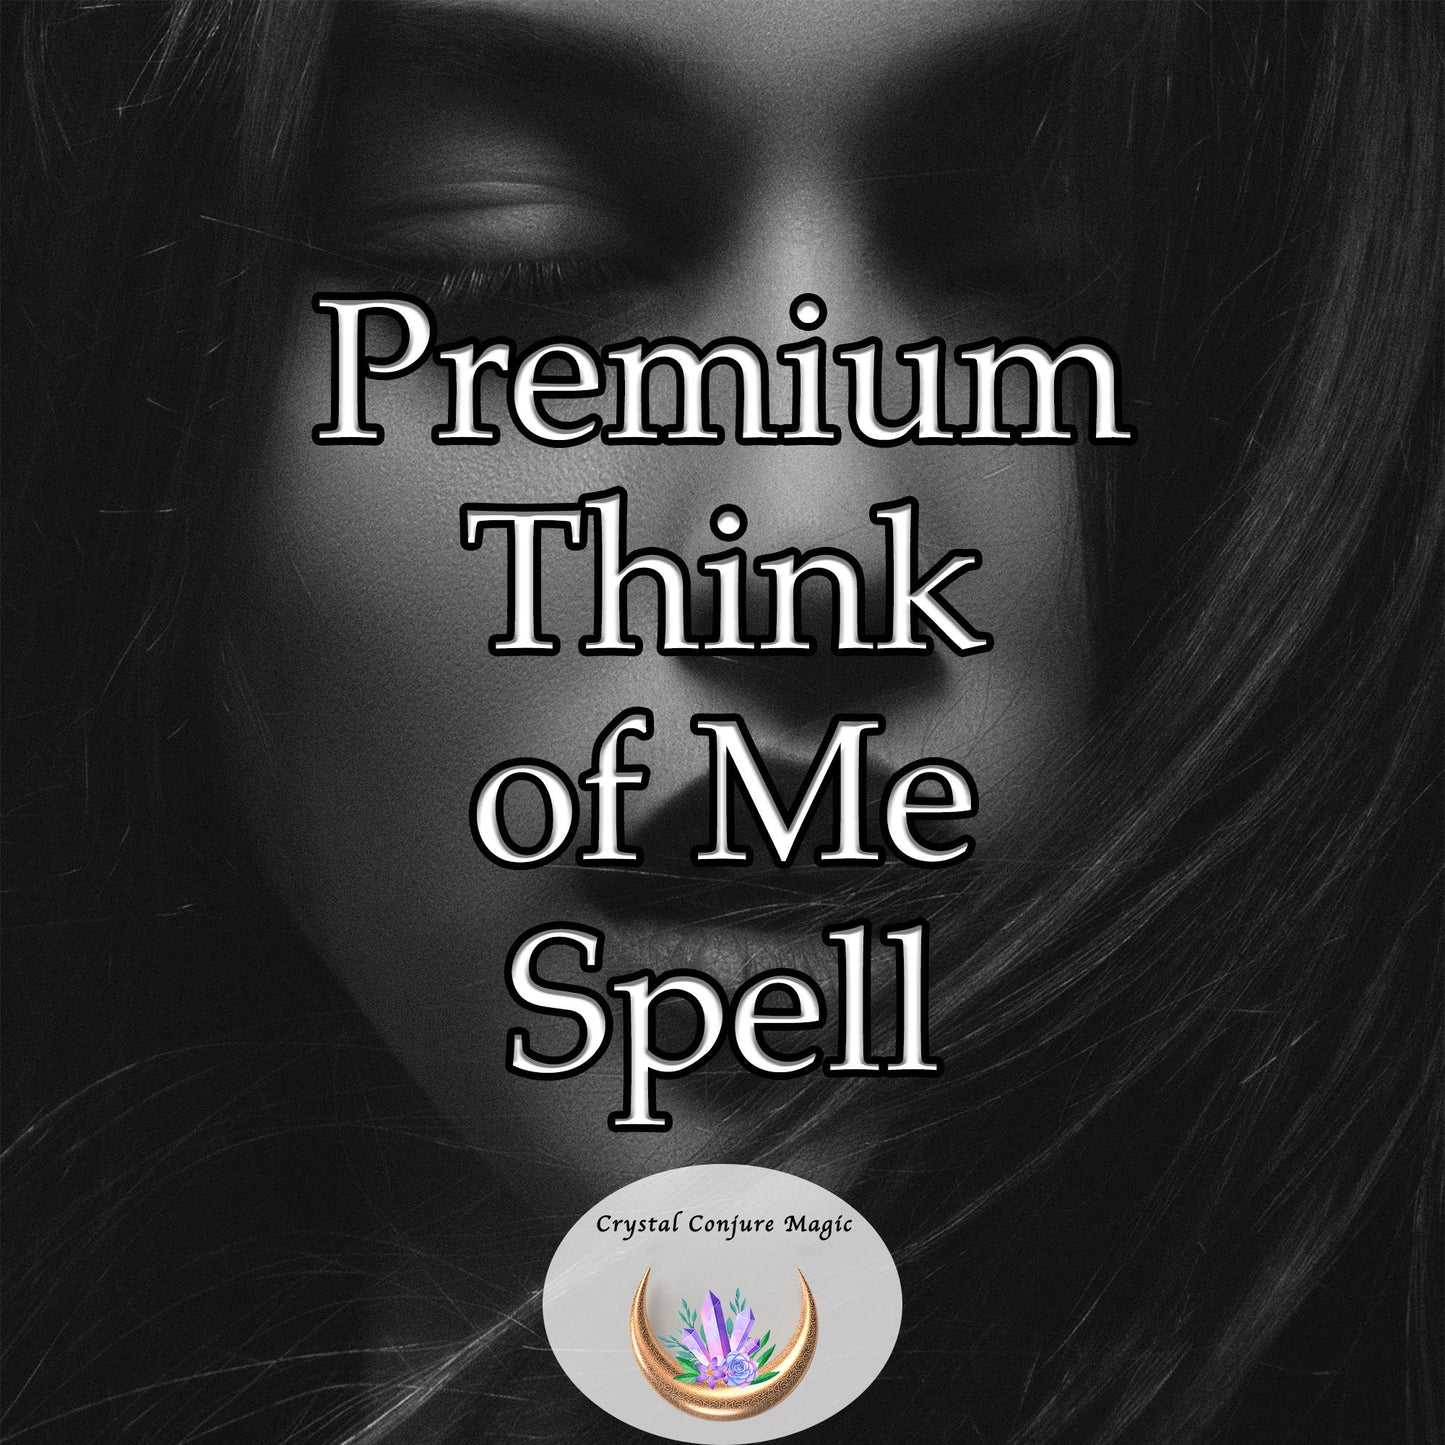 Premium Think of Me Spell - become an unforgettable memory, a charming thought, a gentle whisper in their minds.